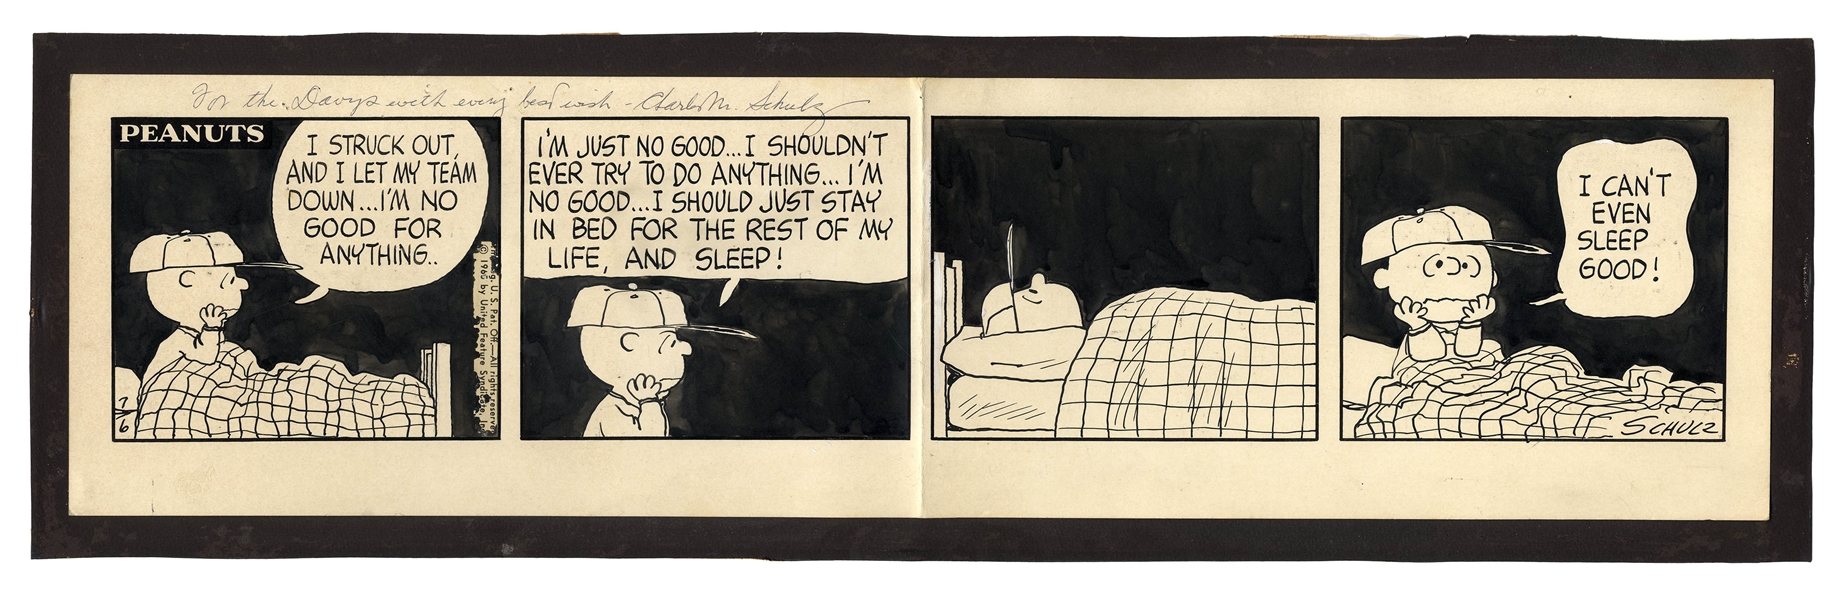 Charles Schulz Hand-Drawn ''Peanuts'' Comic Strip From 1965, Featuring Charlie Brown